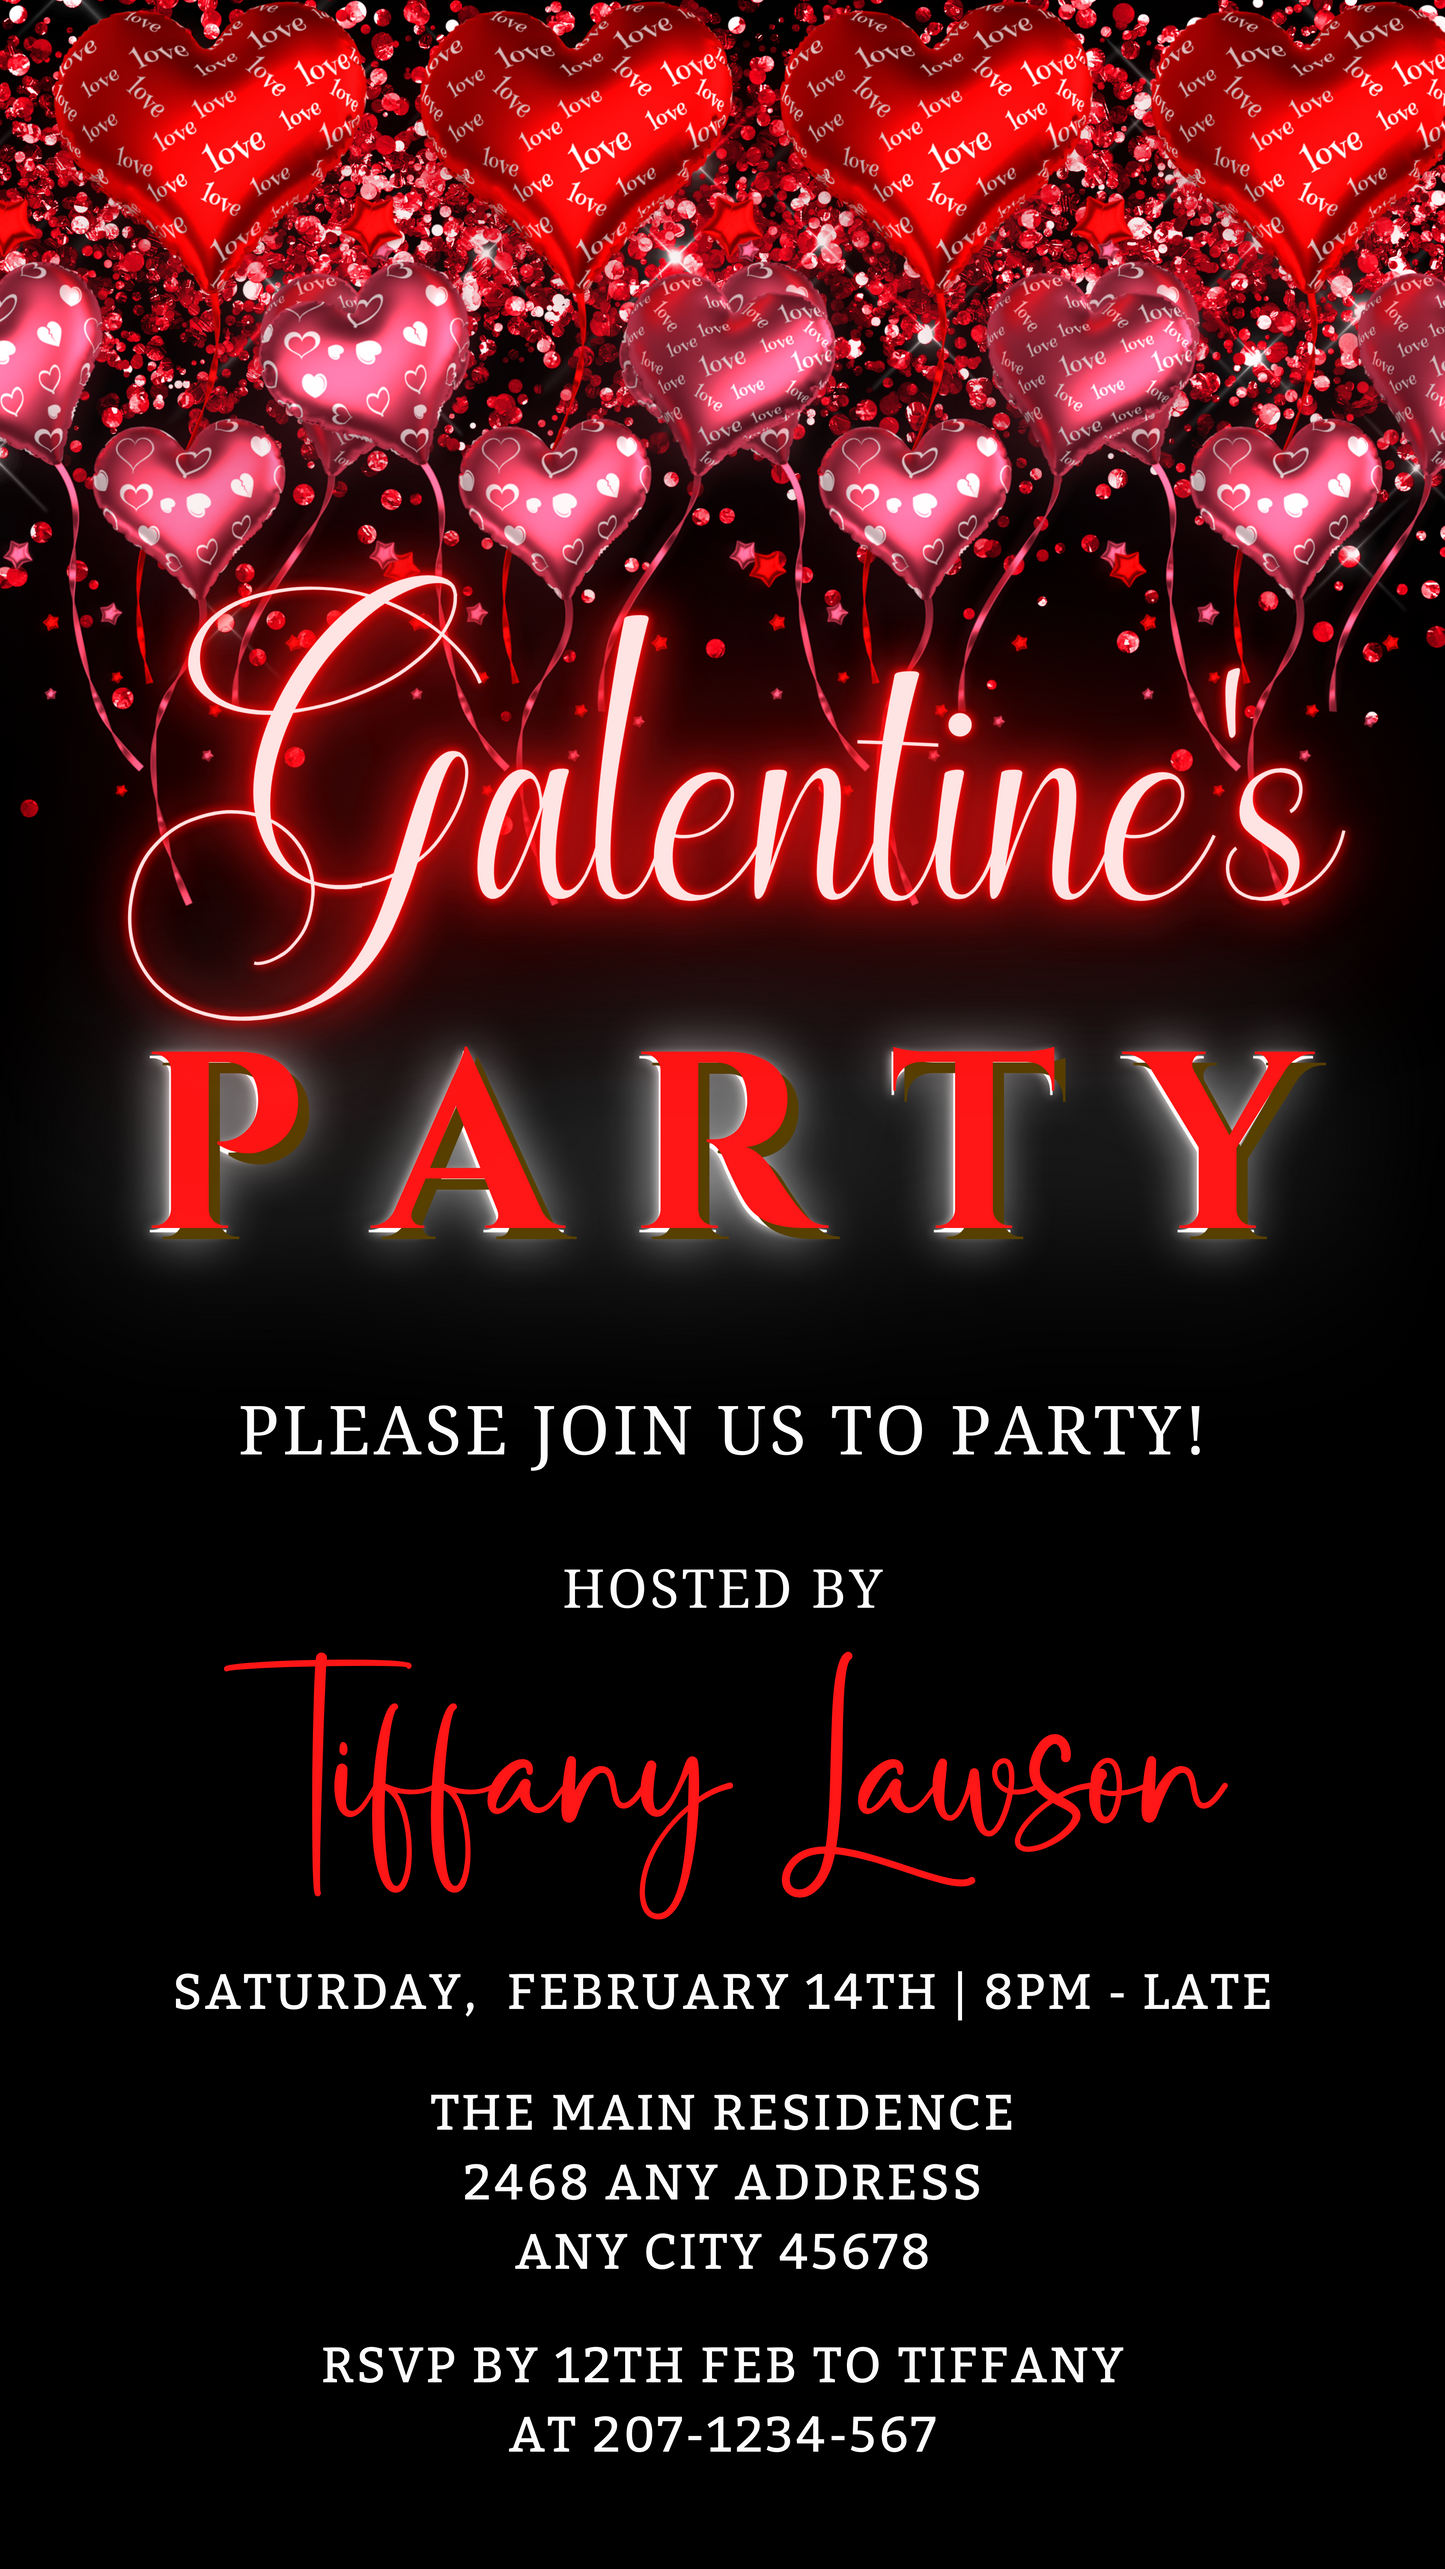 Floating red heart balloons Galentines party evite with customizable text, editable via Canva for smartphone use. Features red and pink balloons and heart-shaped elements.